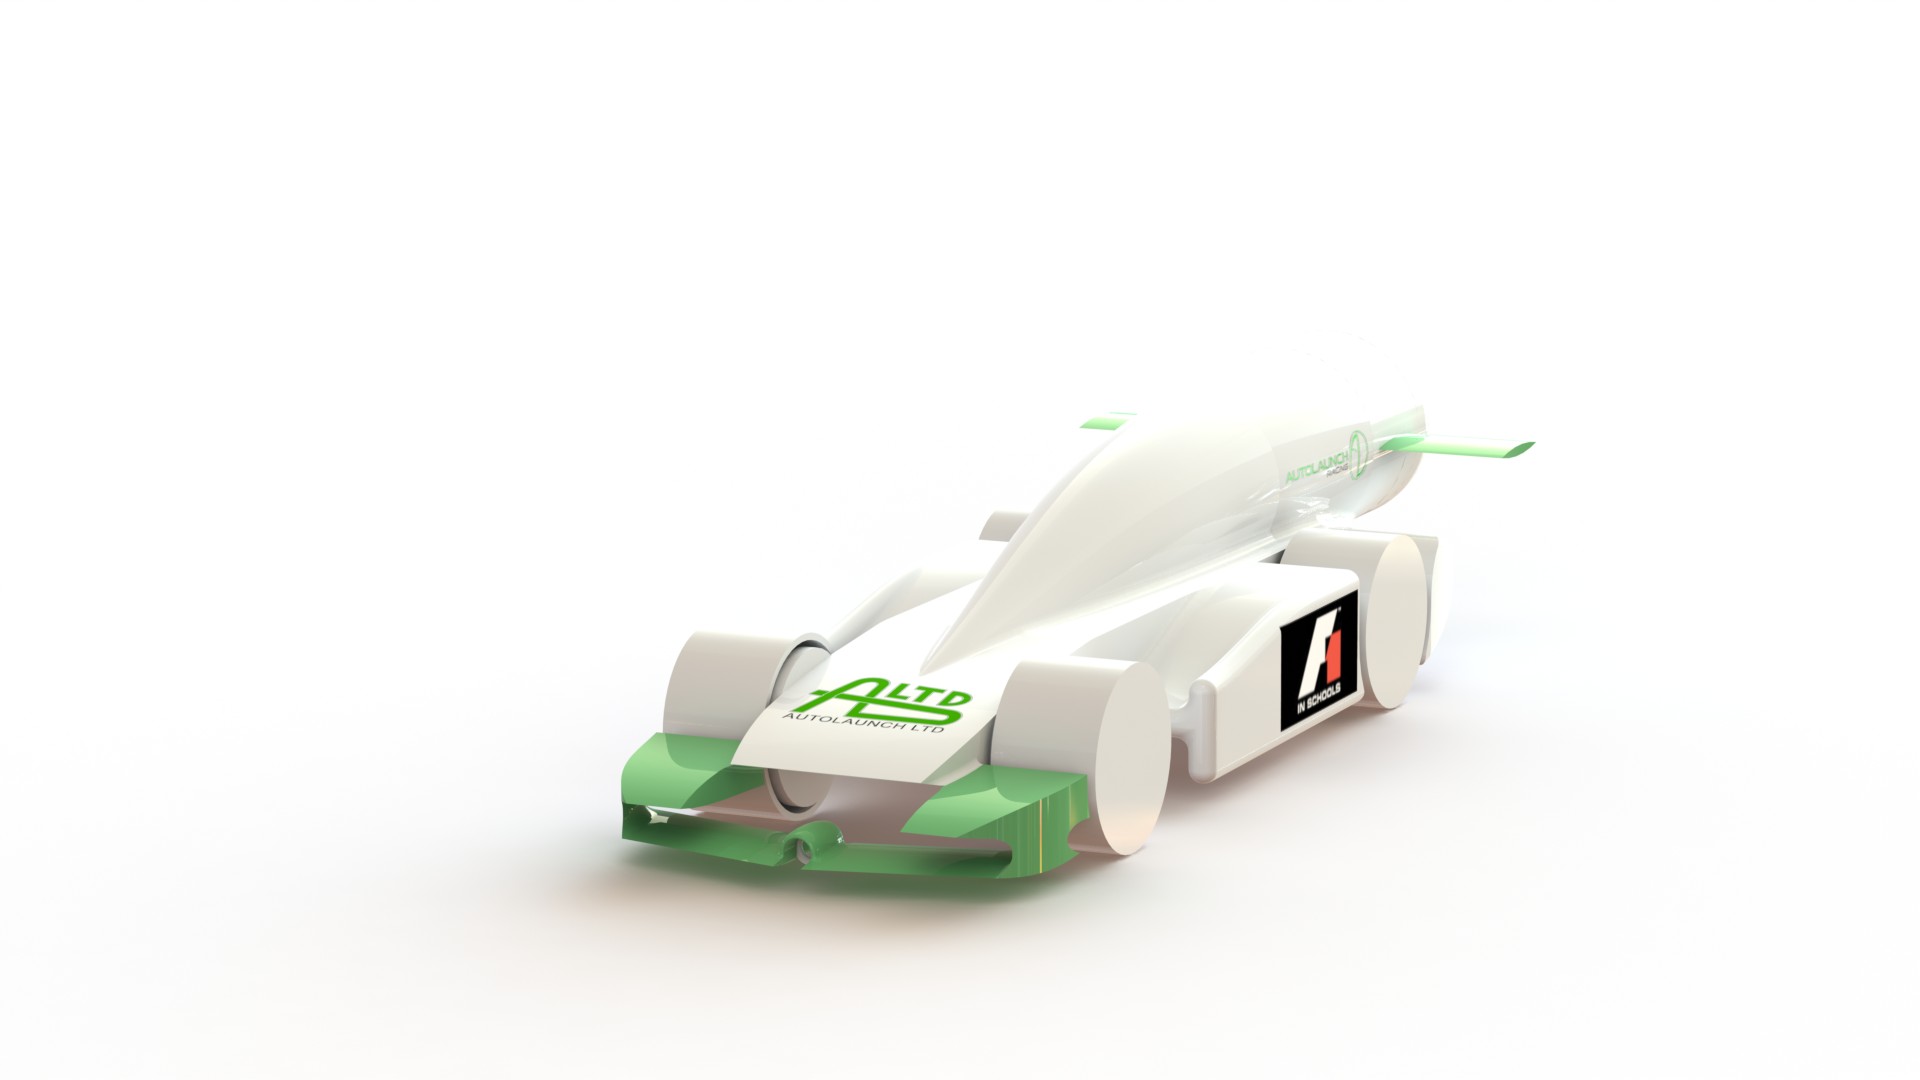 The design for Autolaunch Racing's 3D-printed car